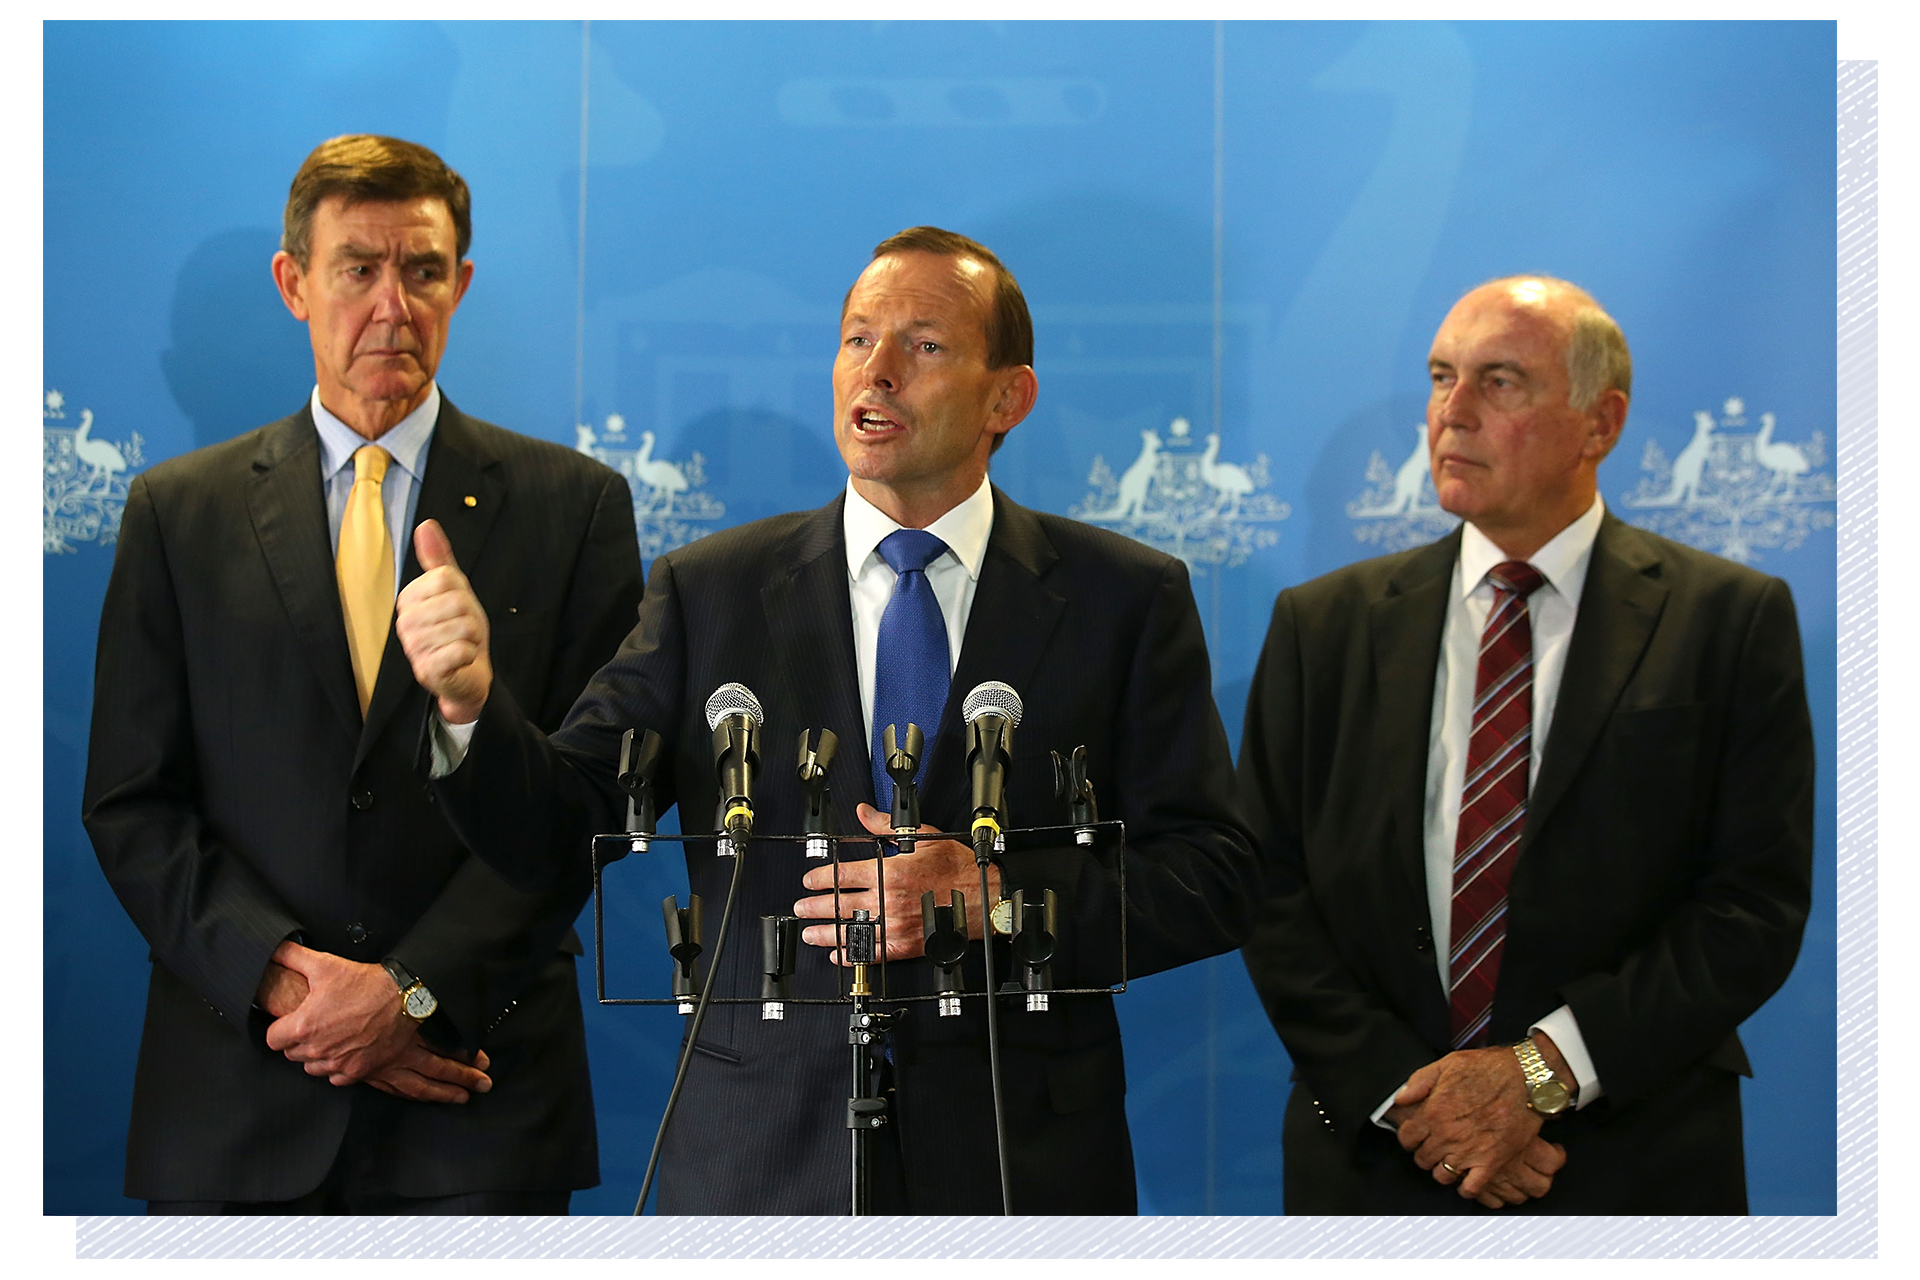 Dressed in suits and tie, Tony Abbott speaks at a press conference, flanked by Angus Houston and Warren Truss.